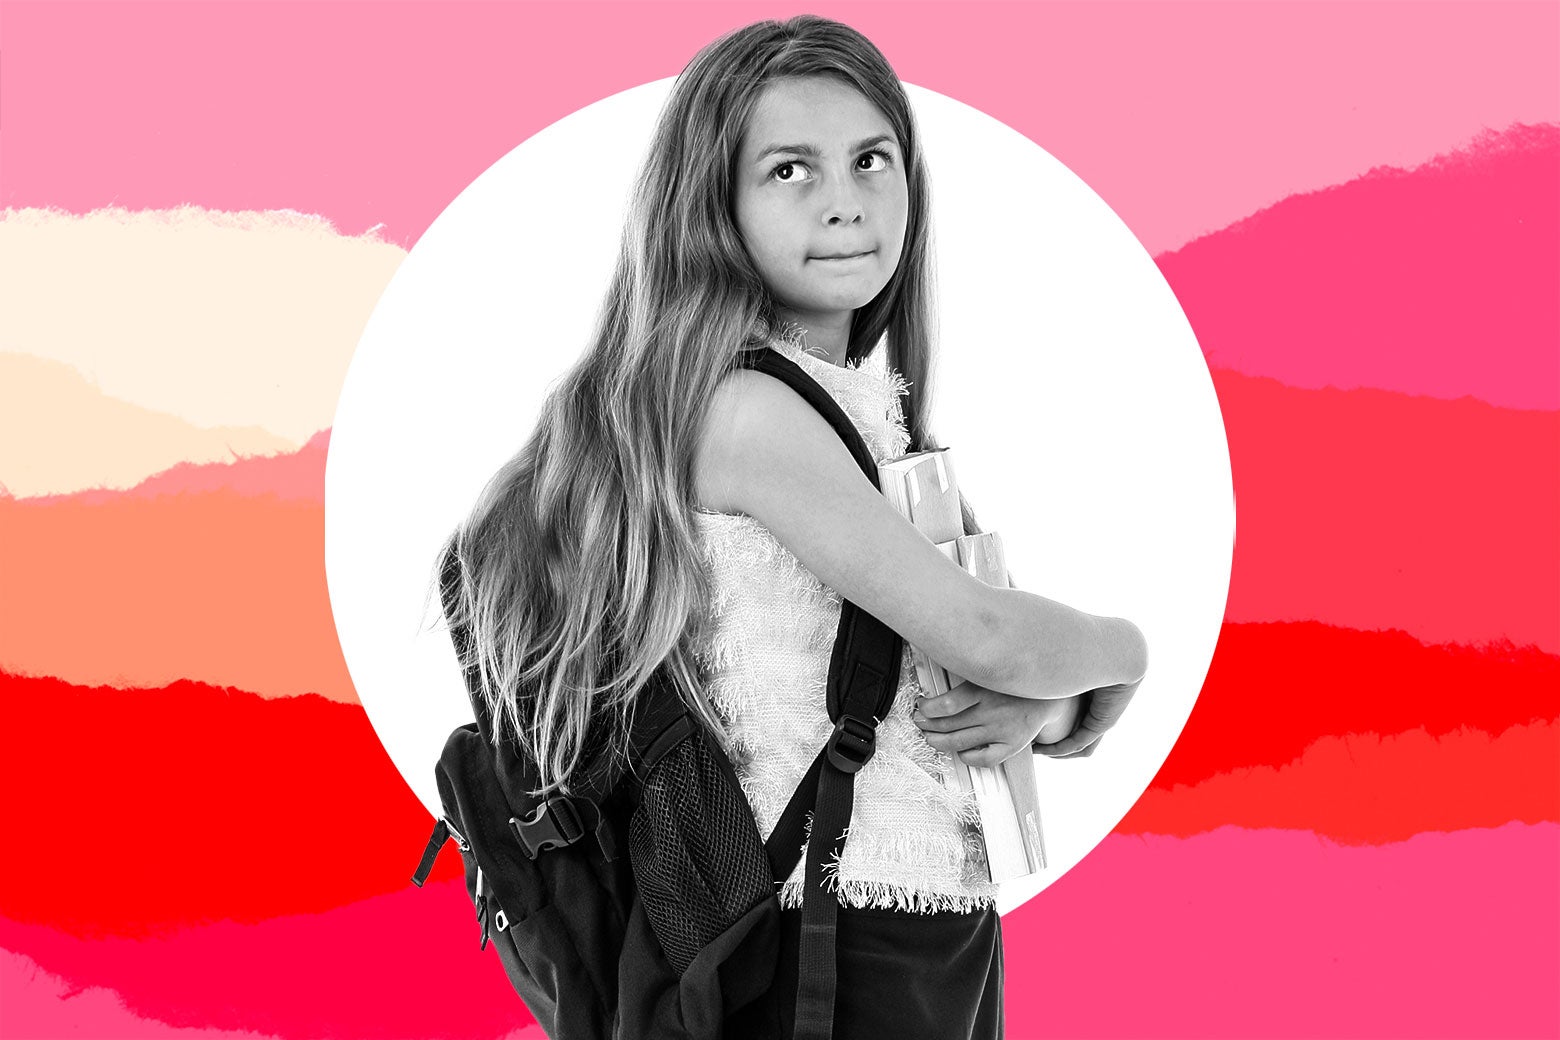 Parenting advice: My daughter has an extremely disturbing classmate, and  the school won't do anything.